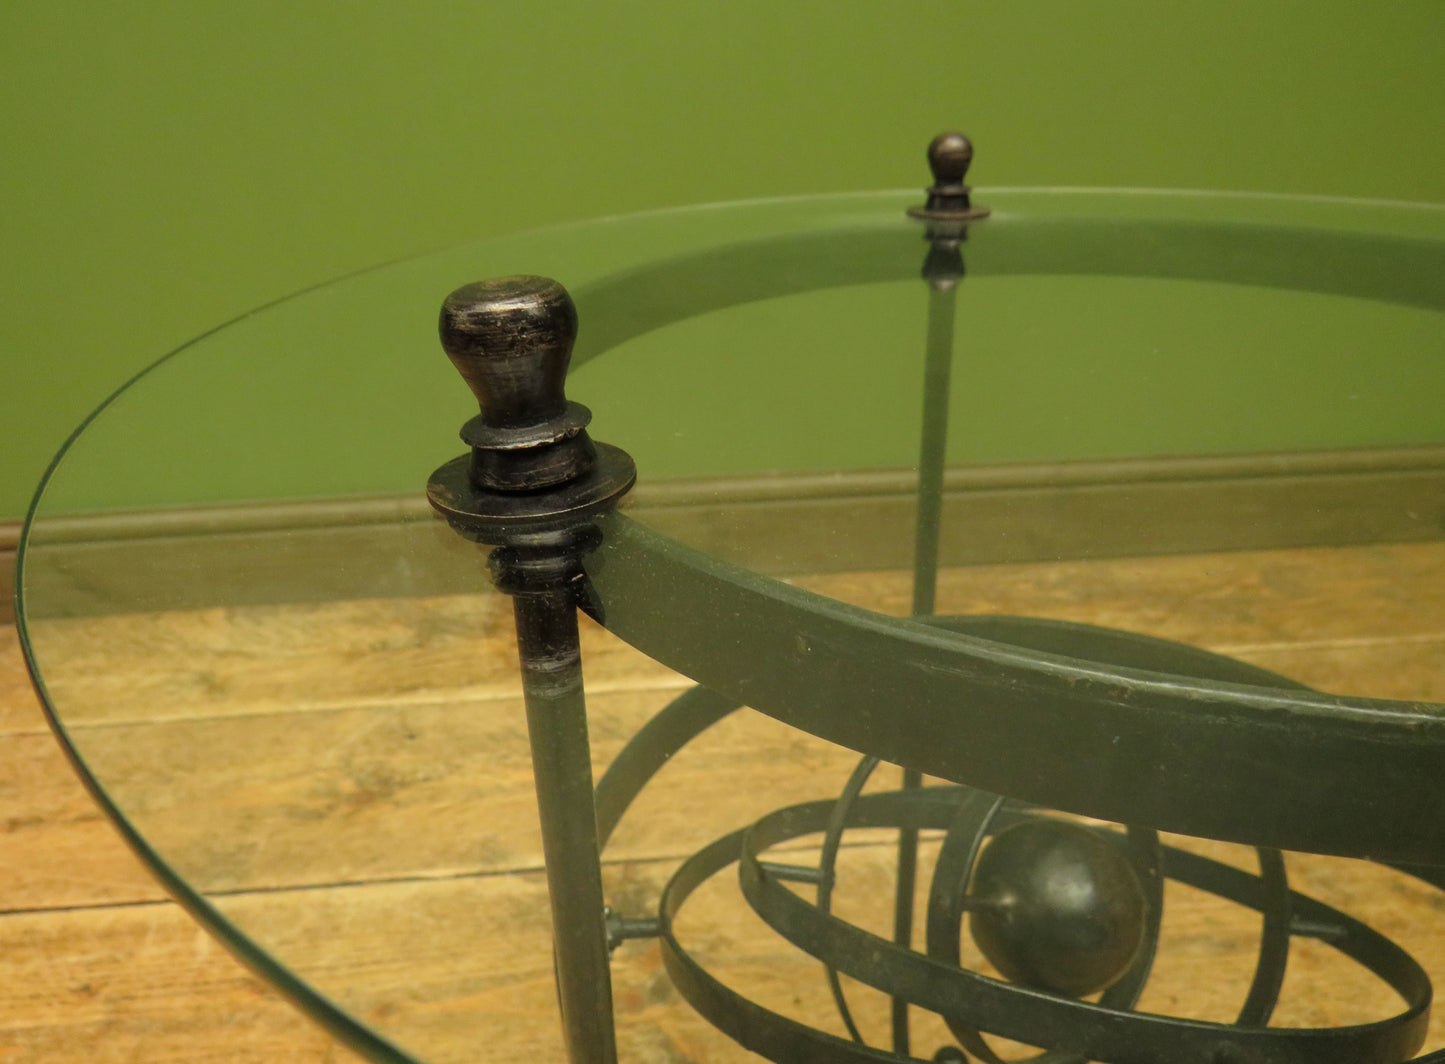 Vintage Steampunk Side Table with Gimbal mounted solar system